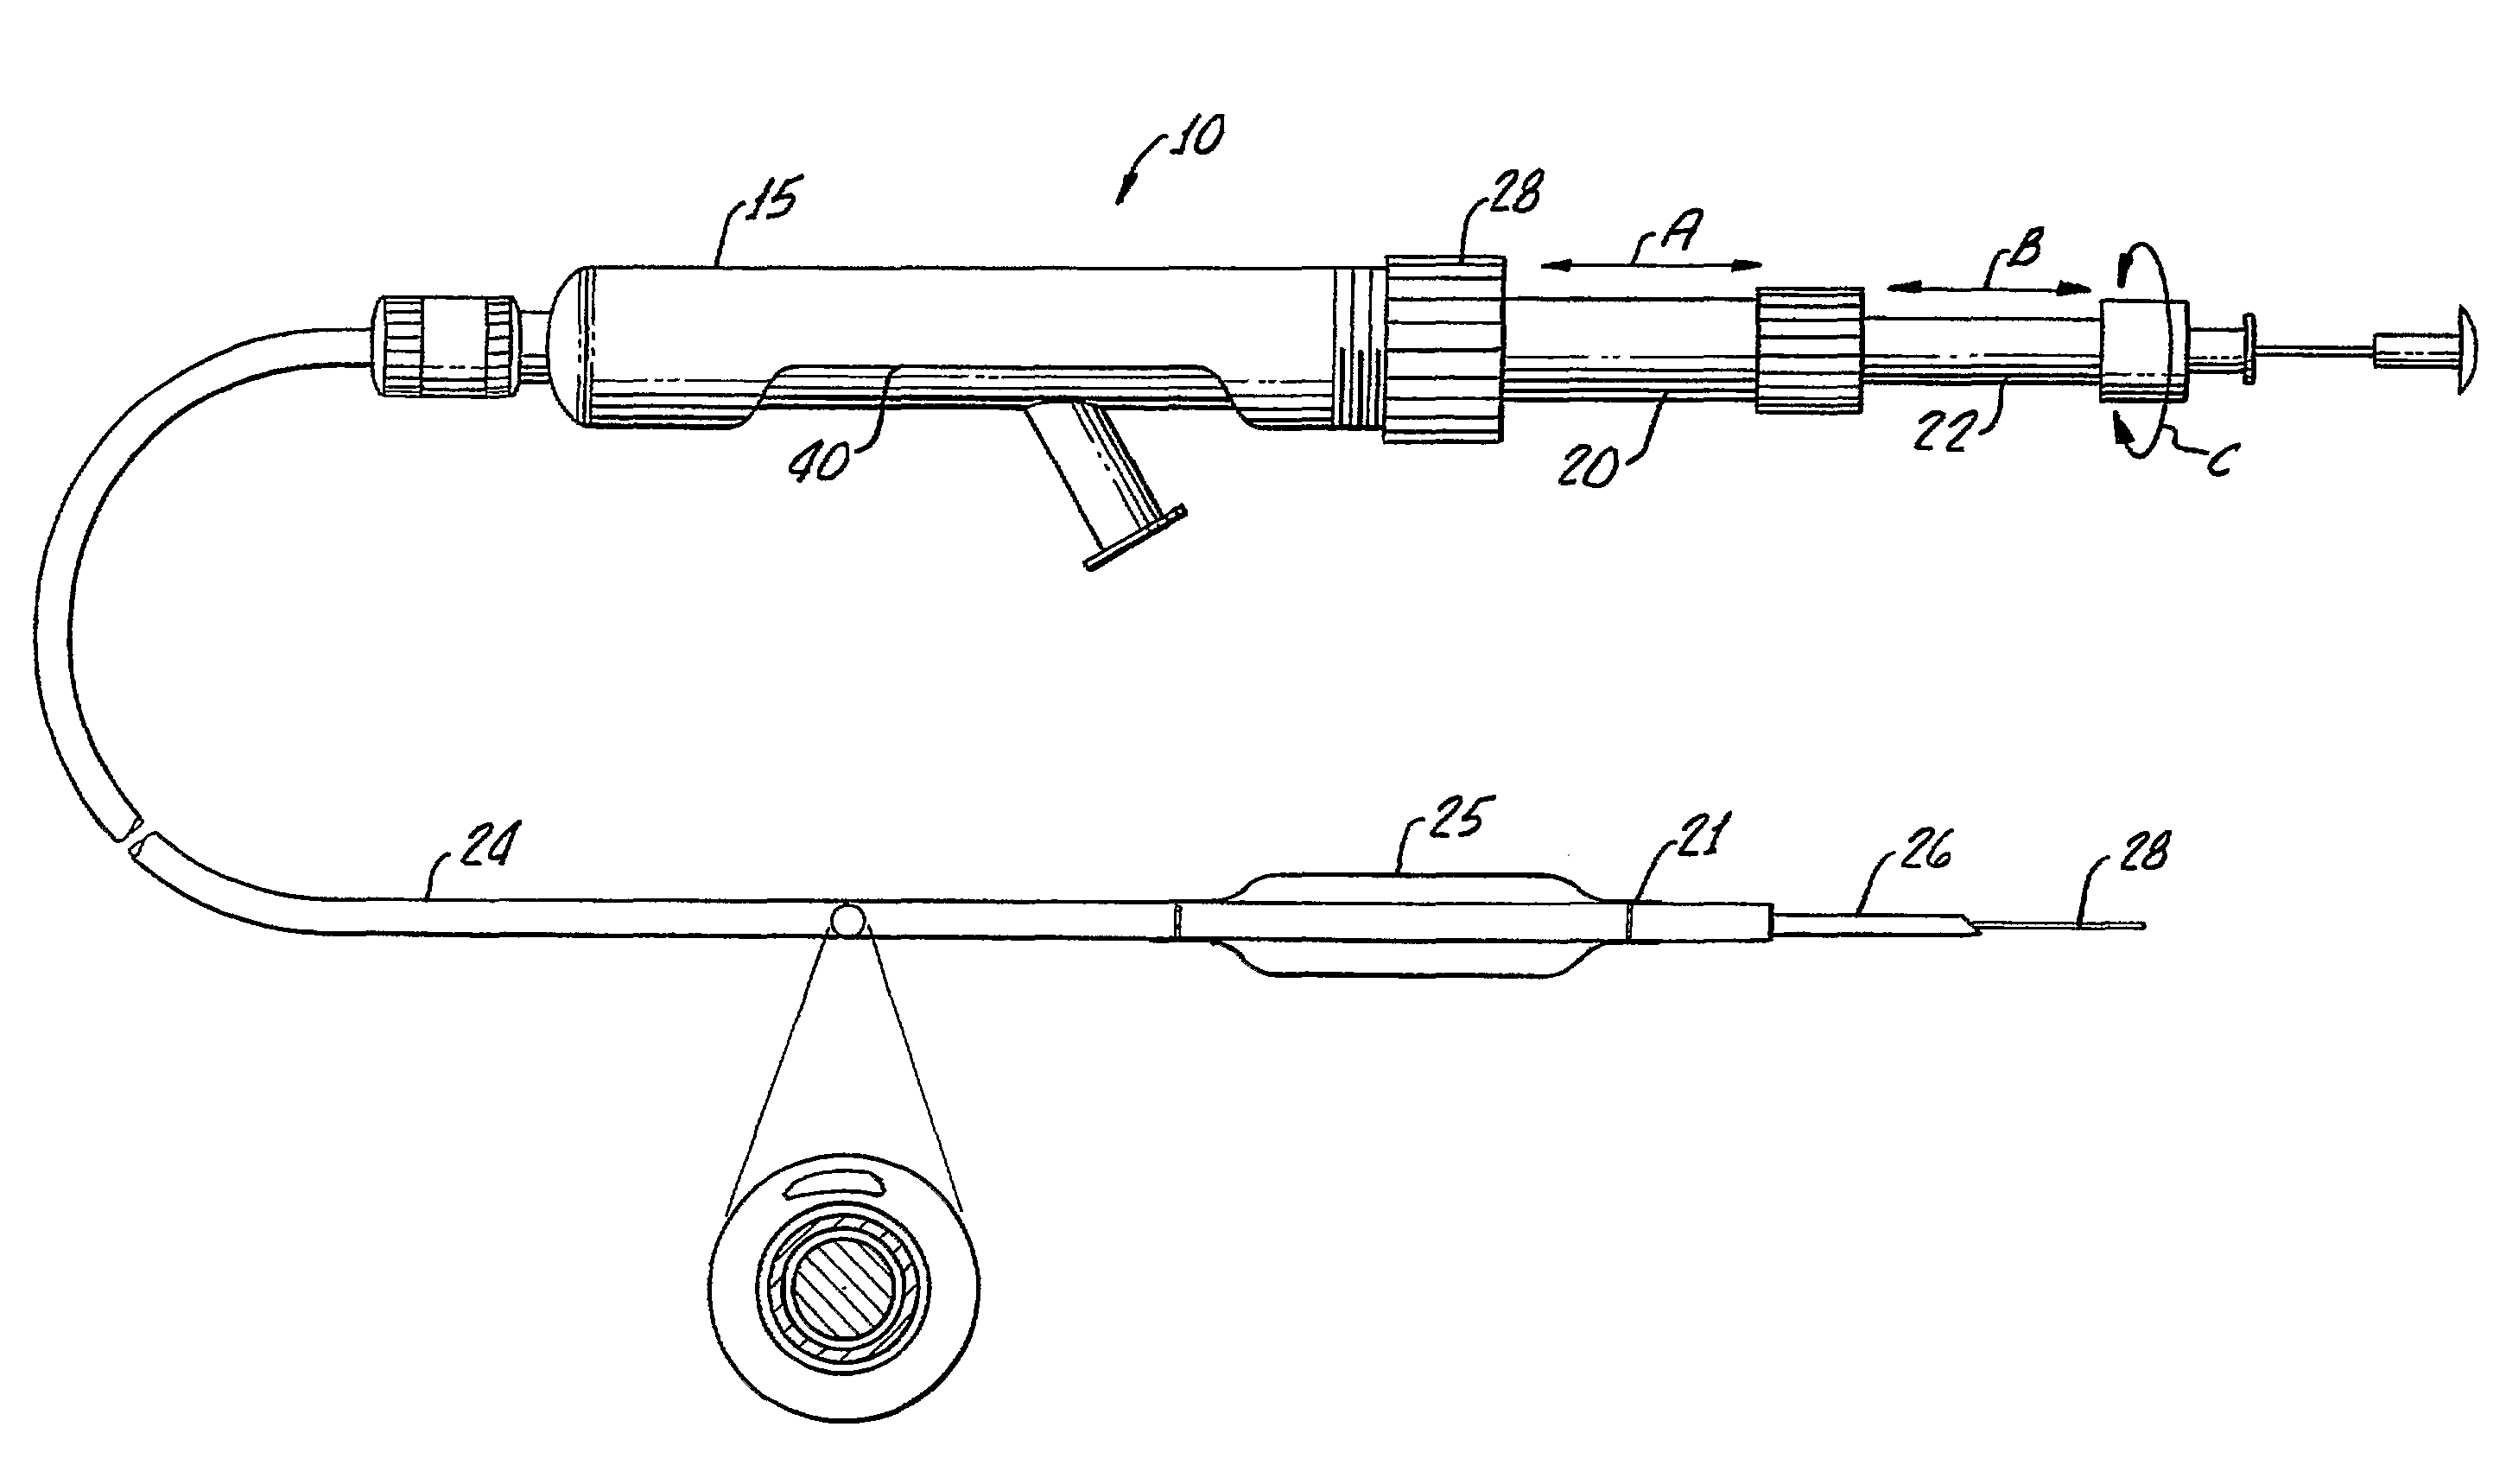 Method and apparatus for performing needle guided interventions